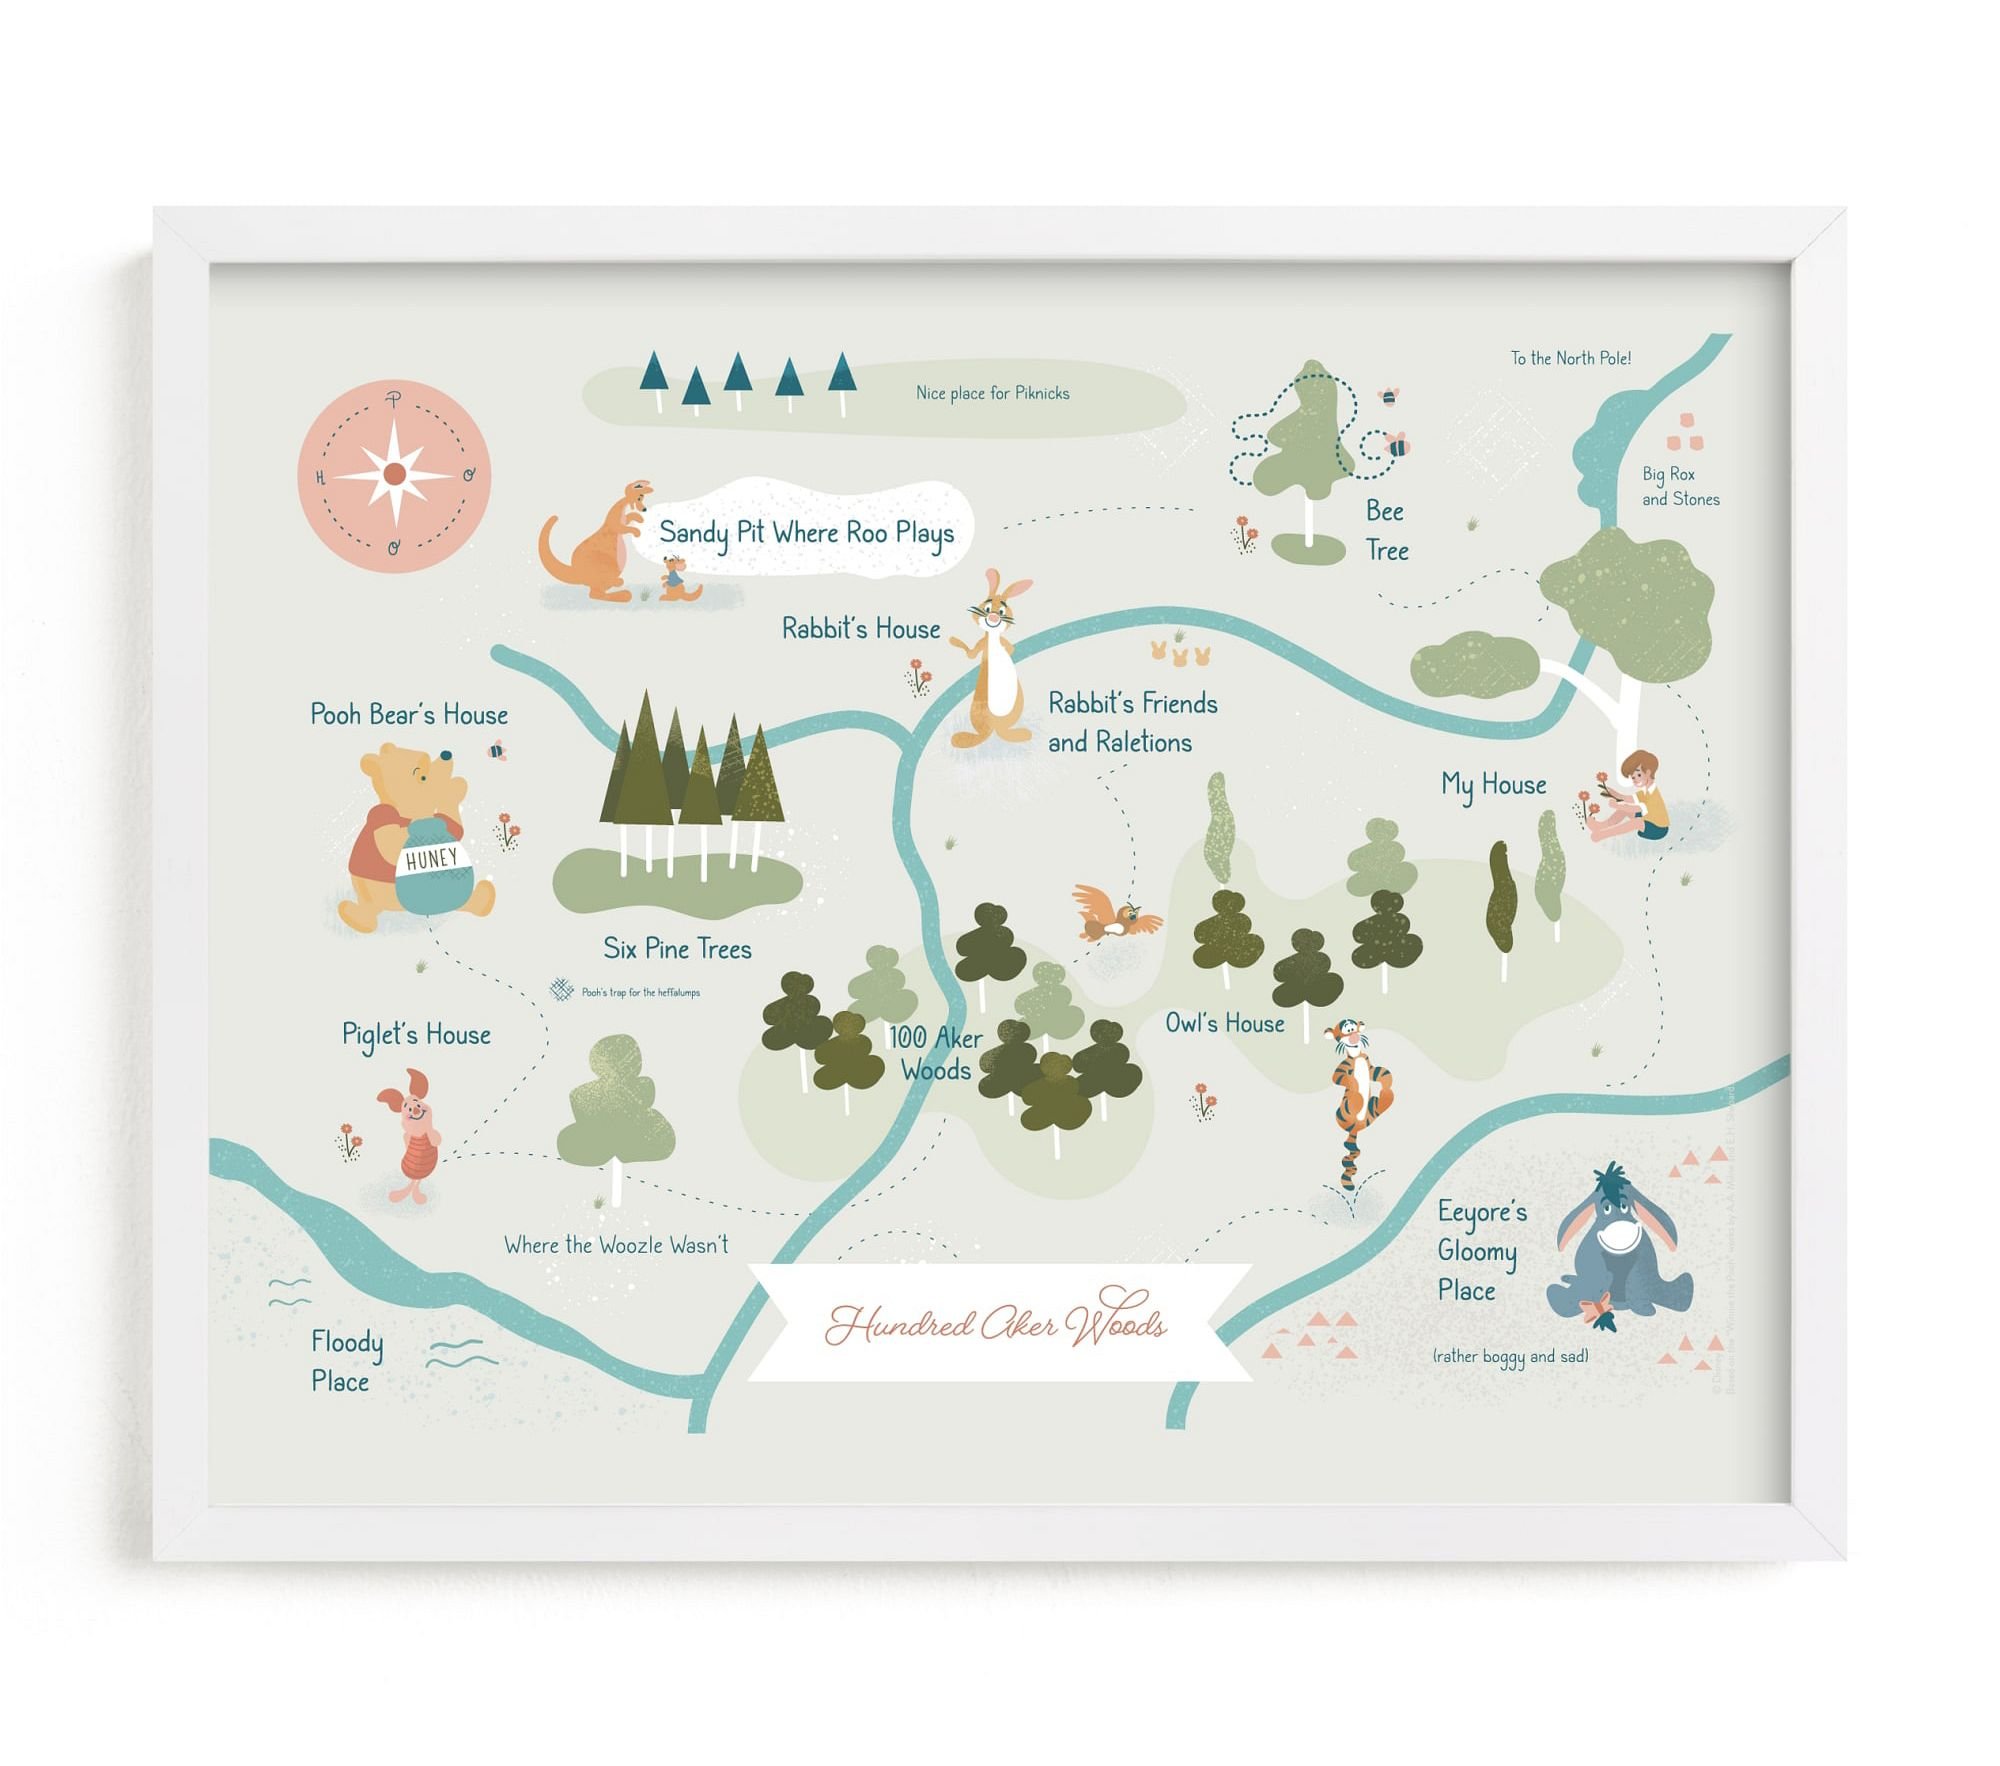 Pottery Barn Kids - $101 - Minted® Disney's Winnie the Pooh Hundred Aker Woods Wall Art by Char-Lynn Griffiths